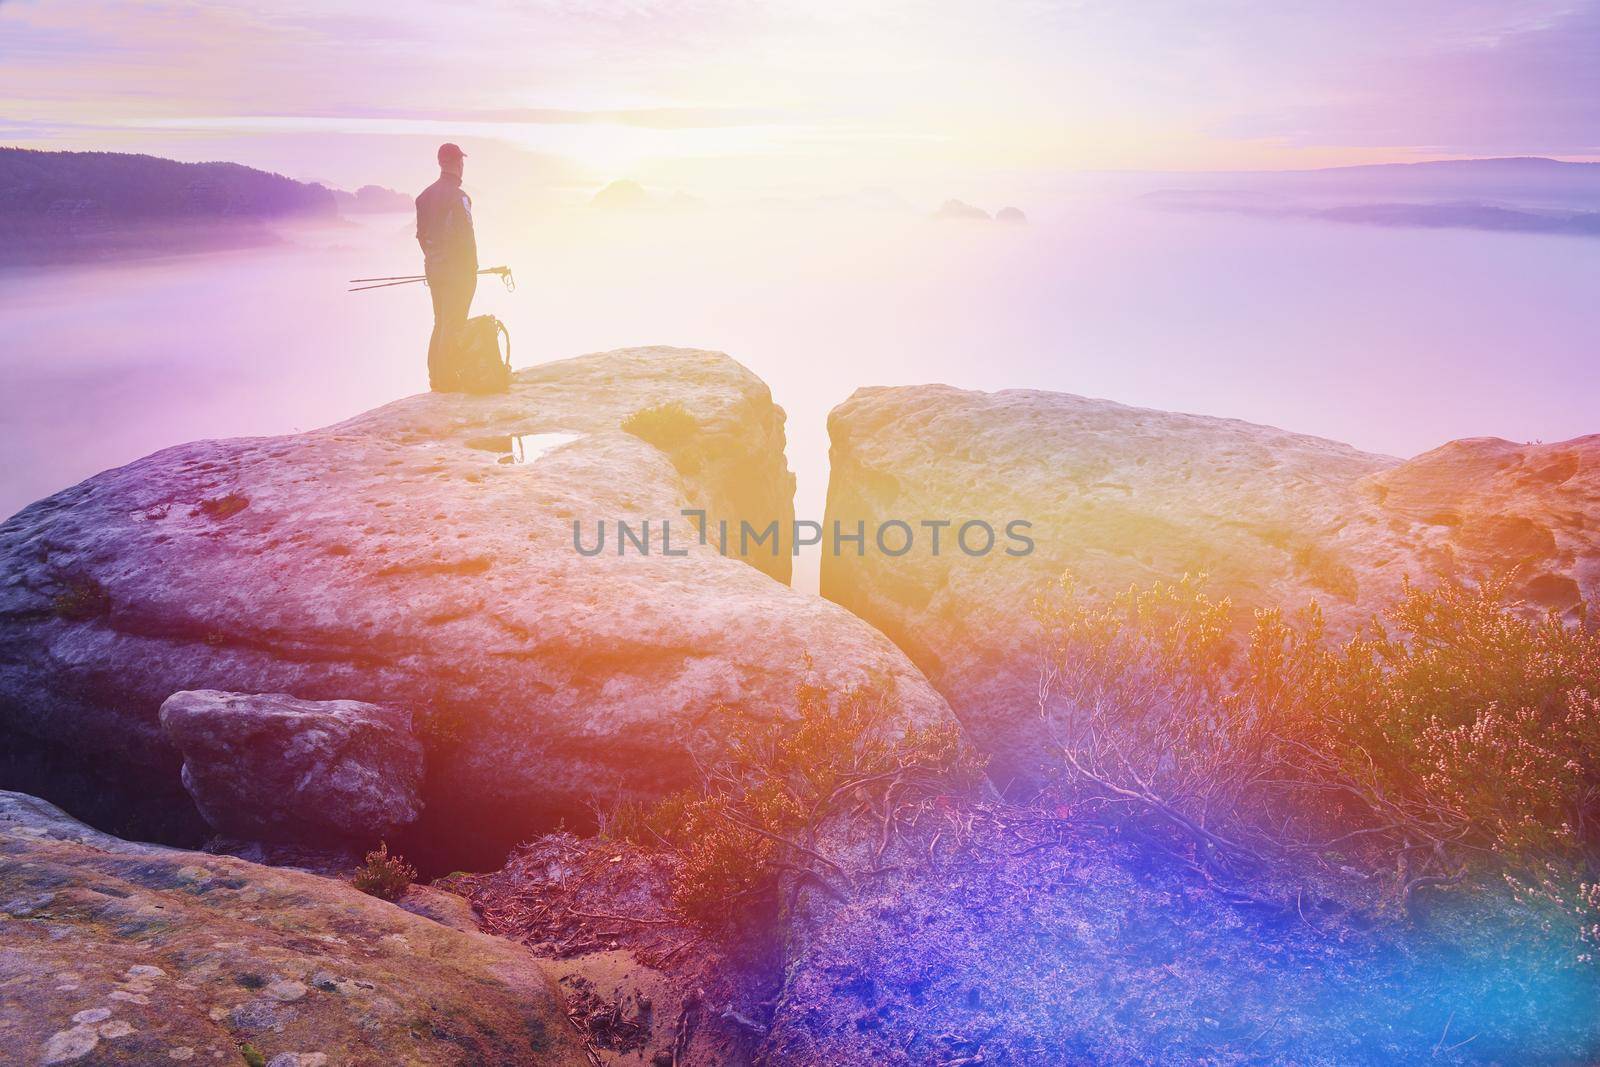 Man with trekking poles on rocky cliff overlooking the misty valley by rdonar2